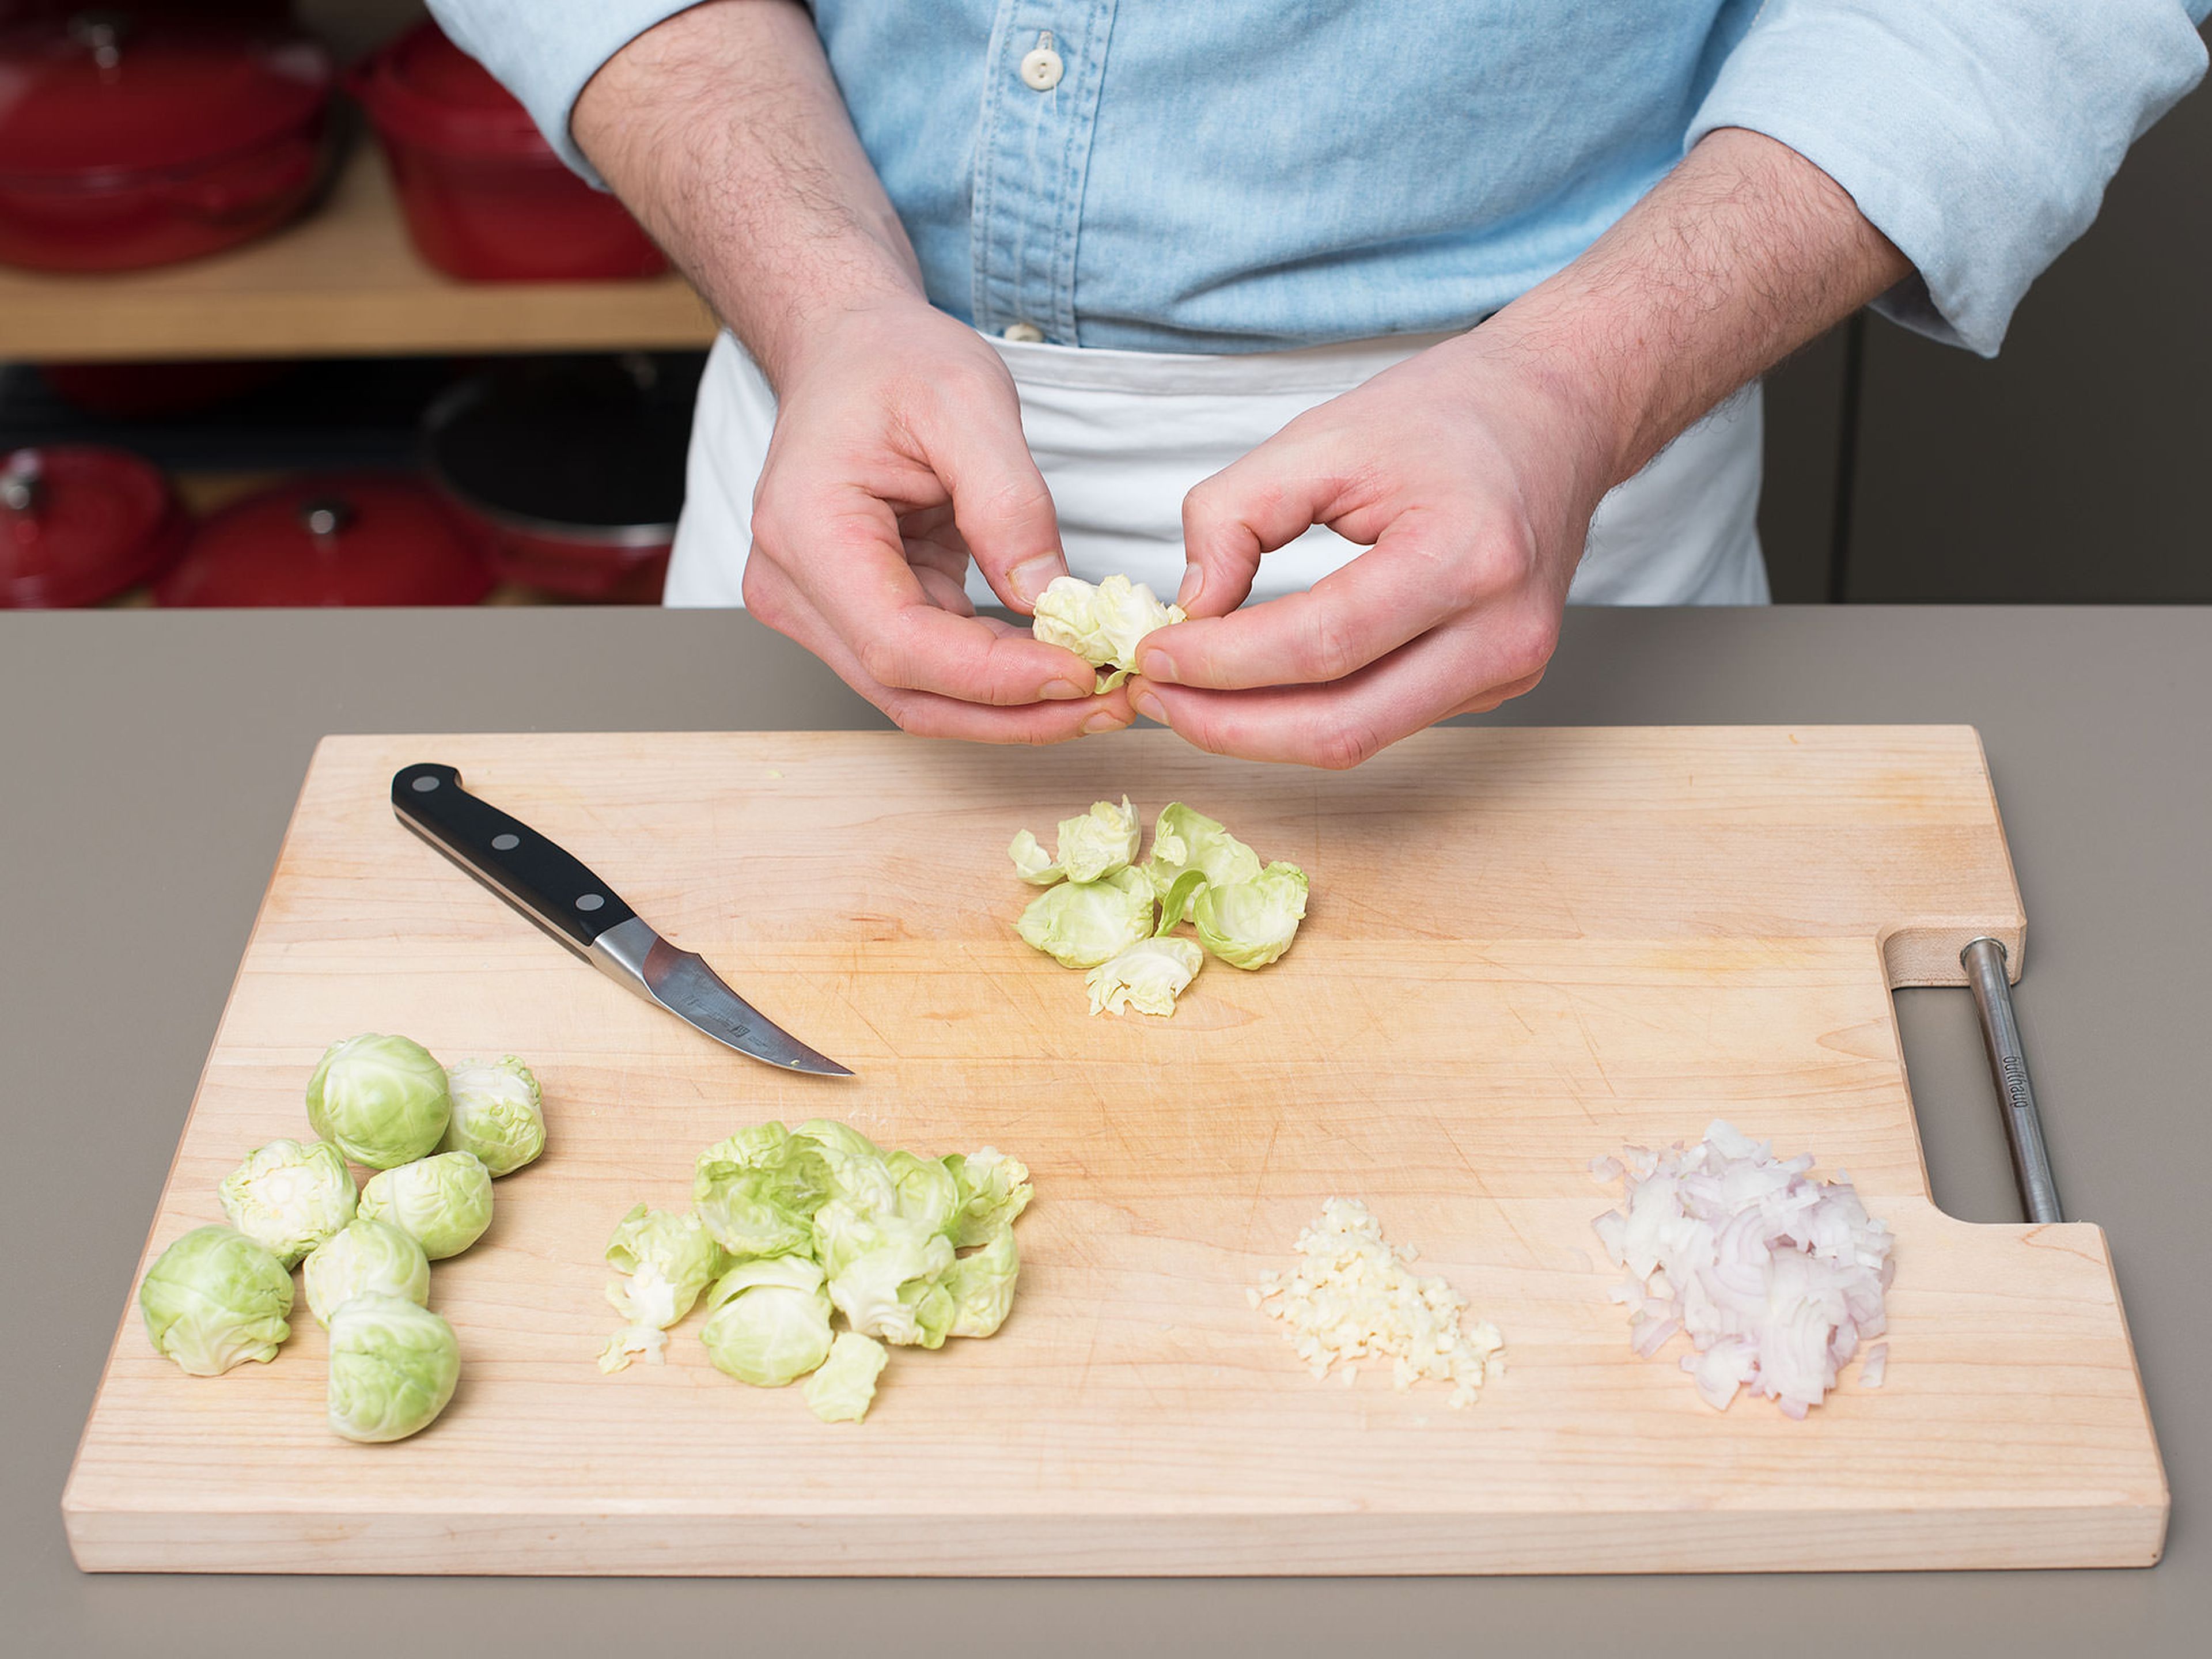 Peel and mince shallots and garlic. Clean and peel Brussels sprouts, then remove the stalk and separate the leaves.